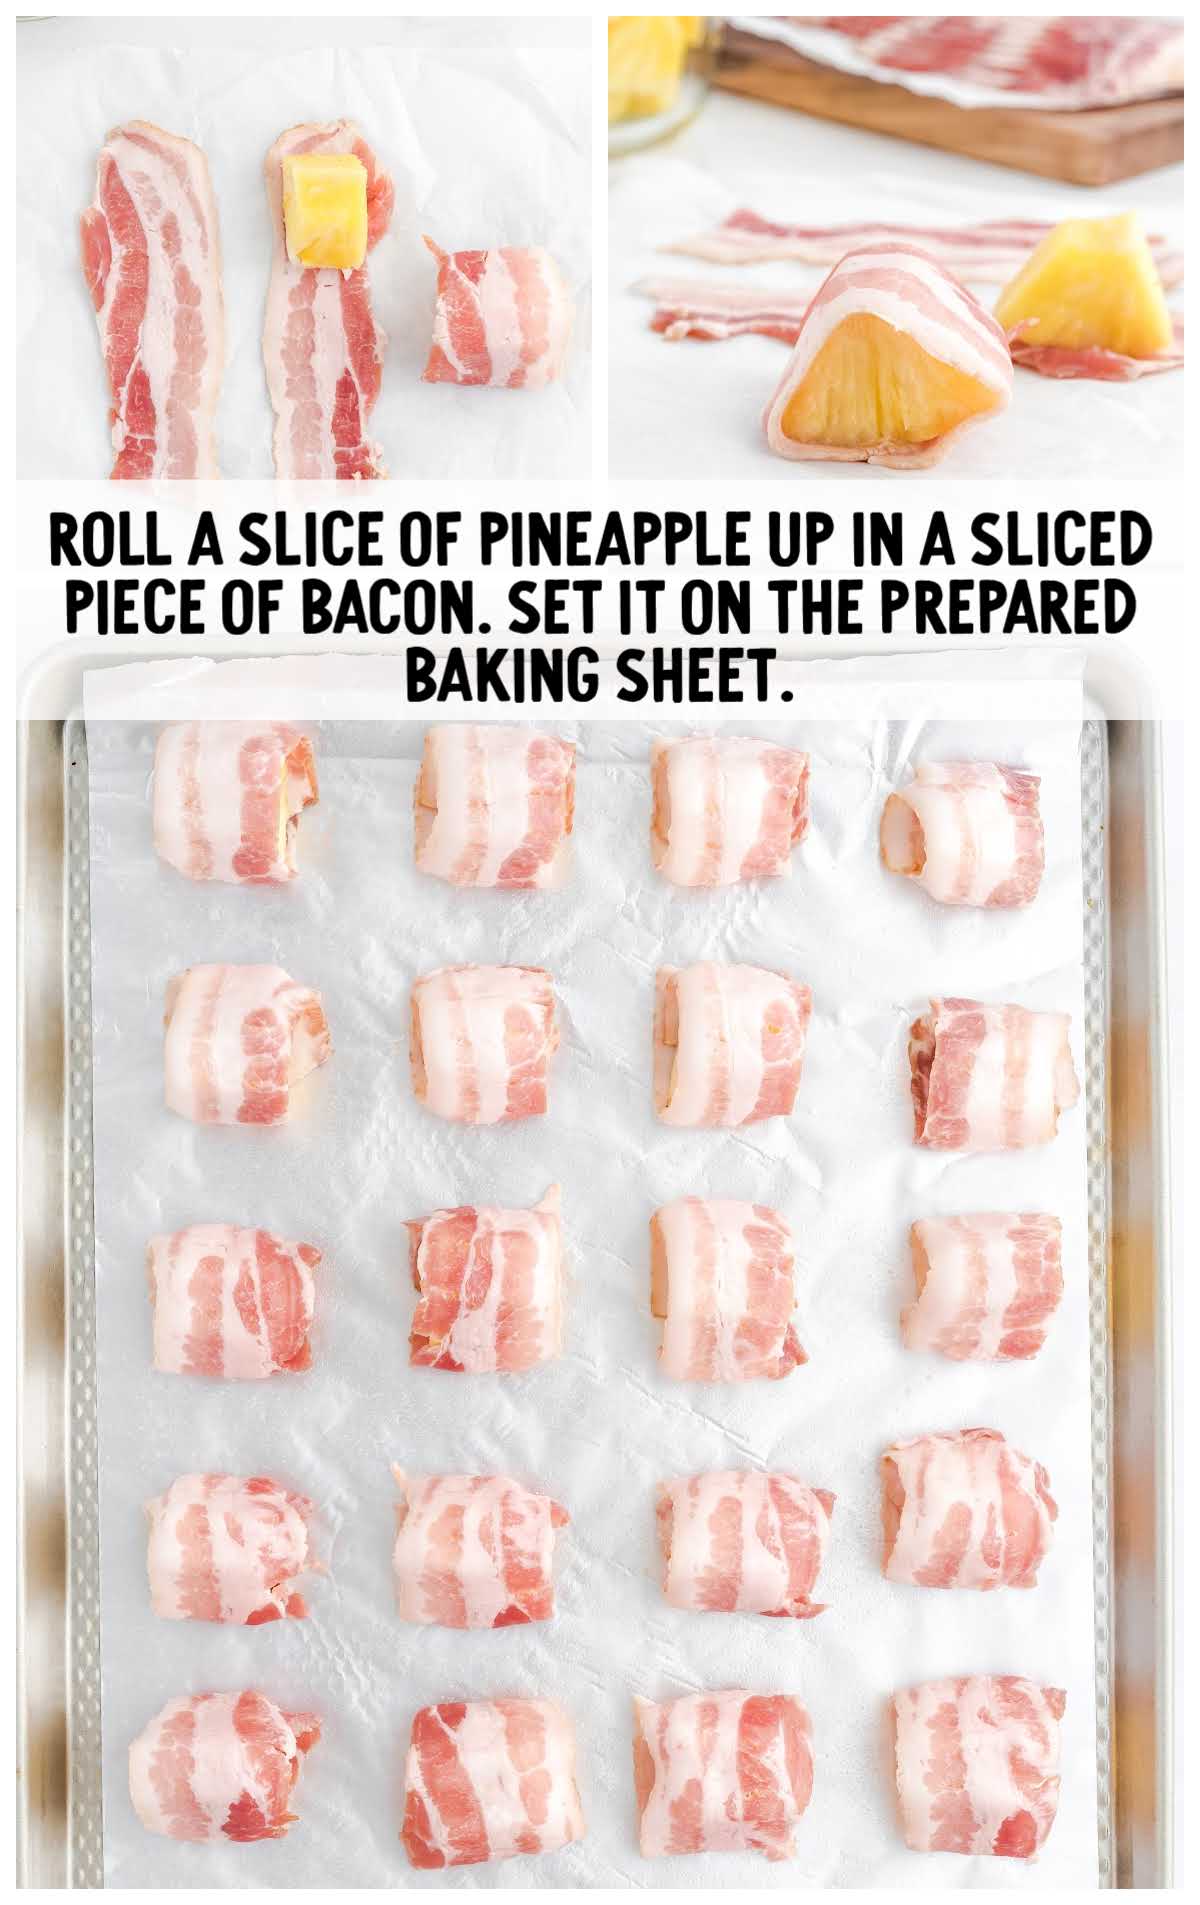 chunks of pineapple rolled into pieces of bacon and placed on a baking sheet